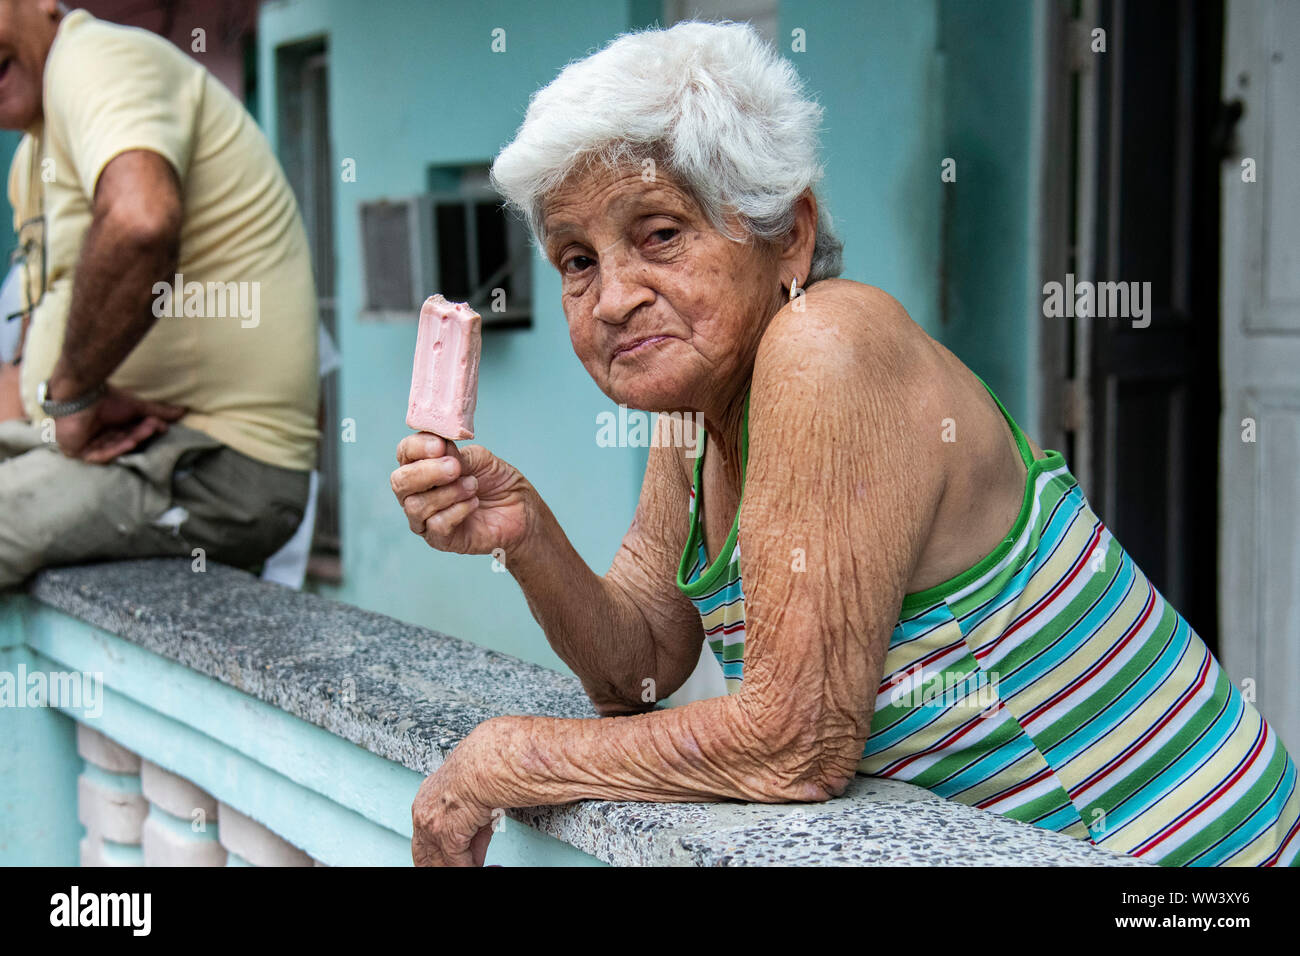 Woman eats an ice cream on a hot day in Cuba Stock Photo